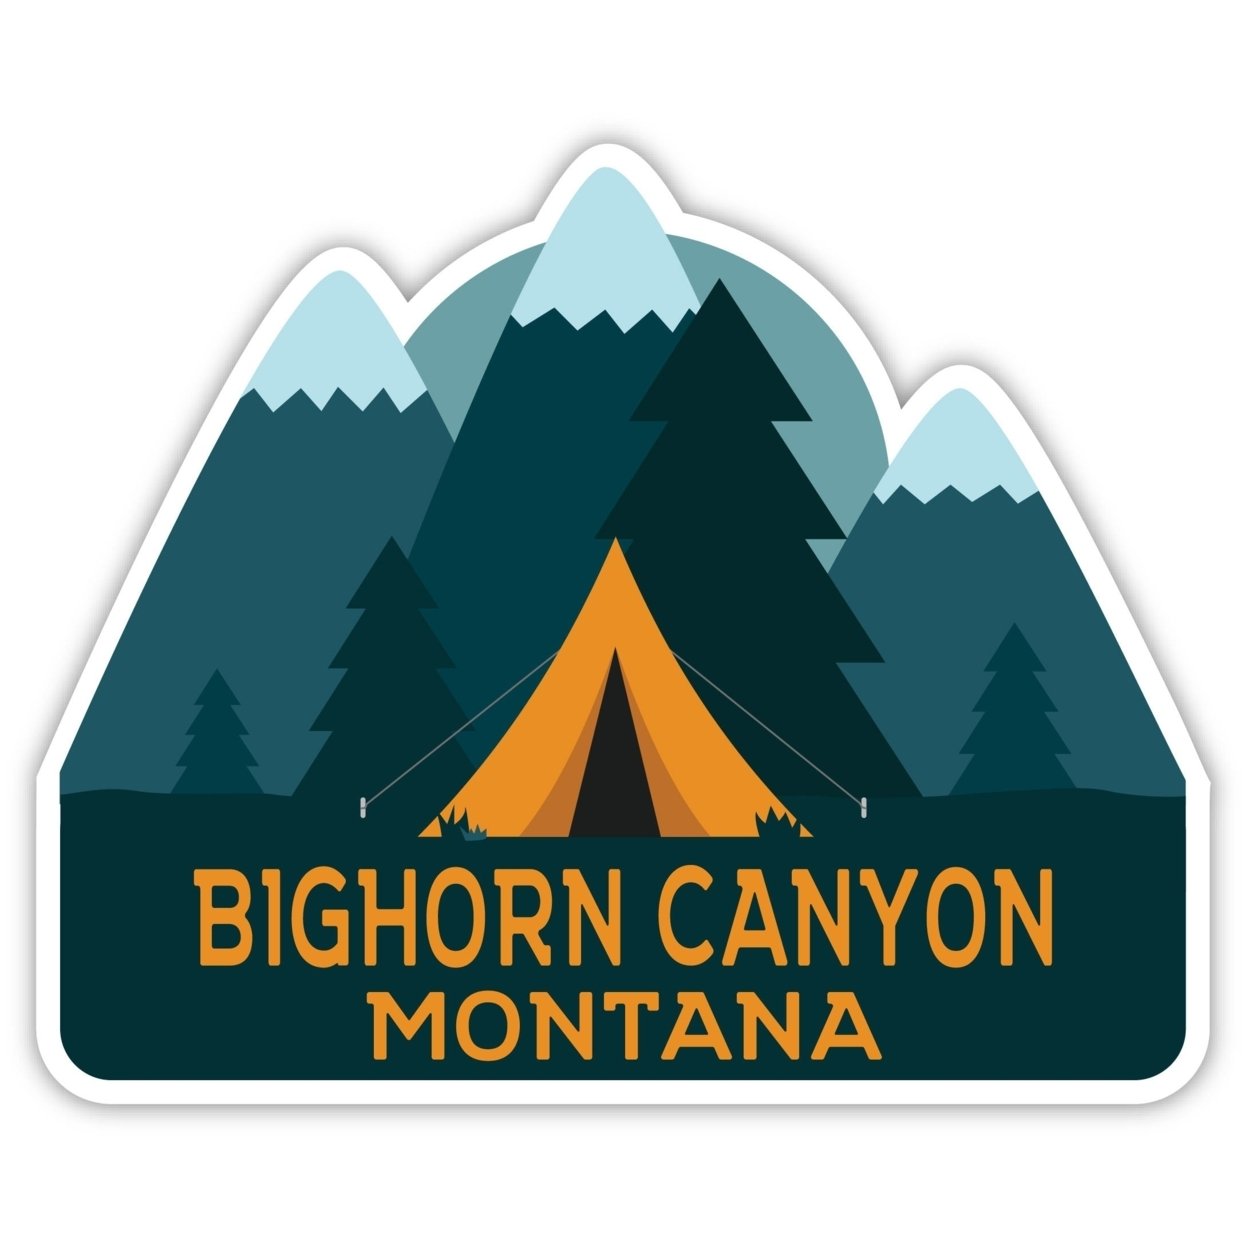 Bighorn Canyon Montana Souvenir Decorative Stickers (Choose Theme And Size) - 4-Pack, 10-Inch, Tent